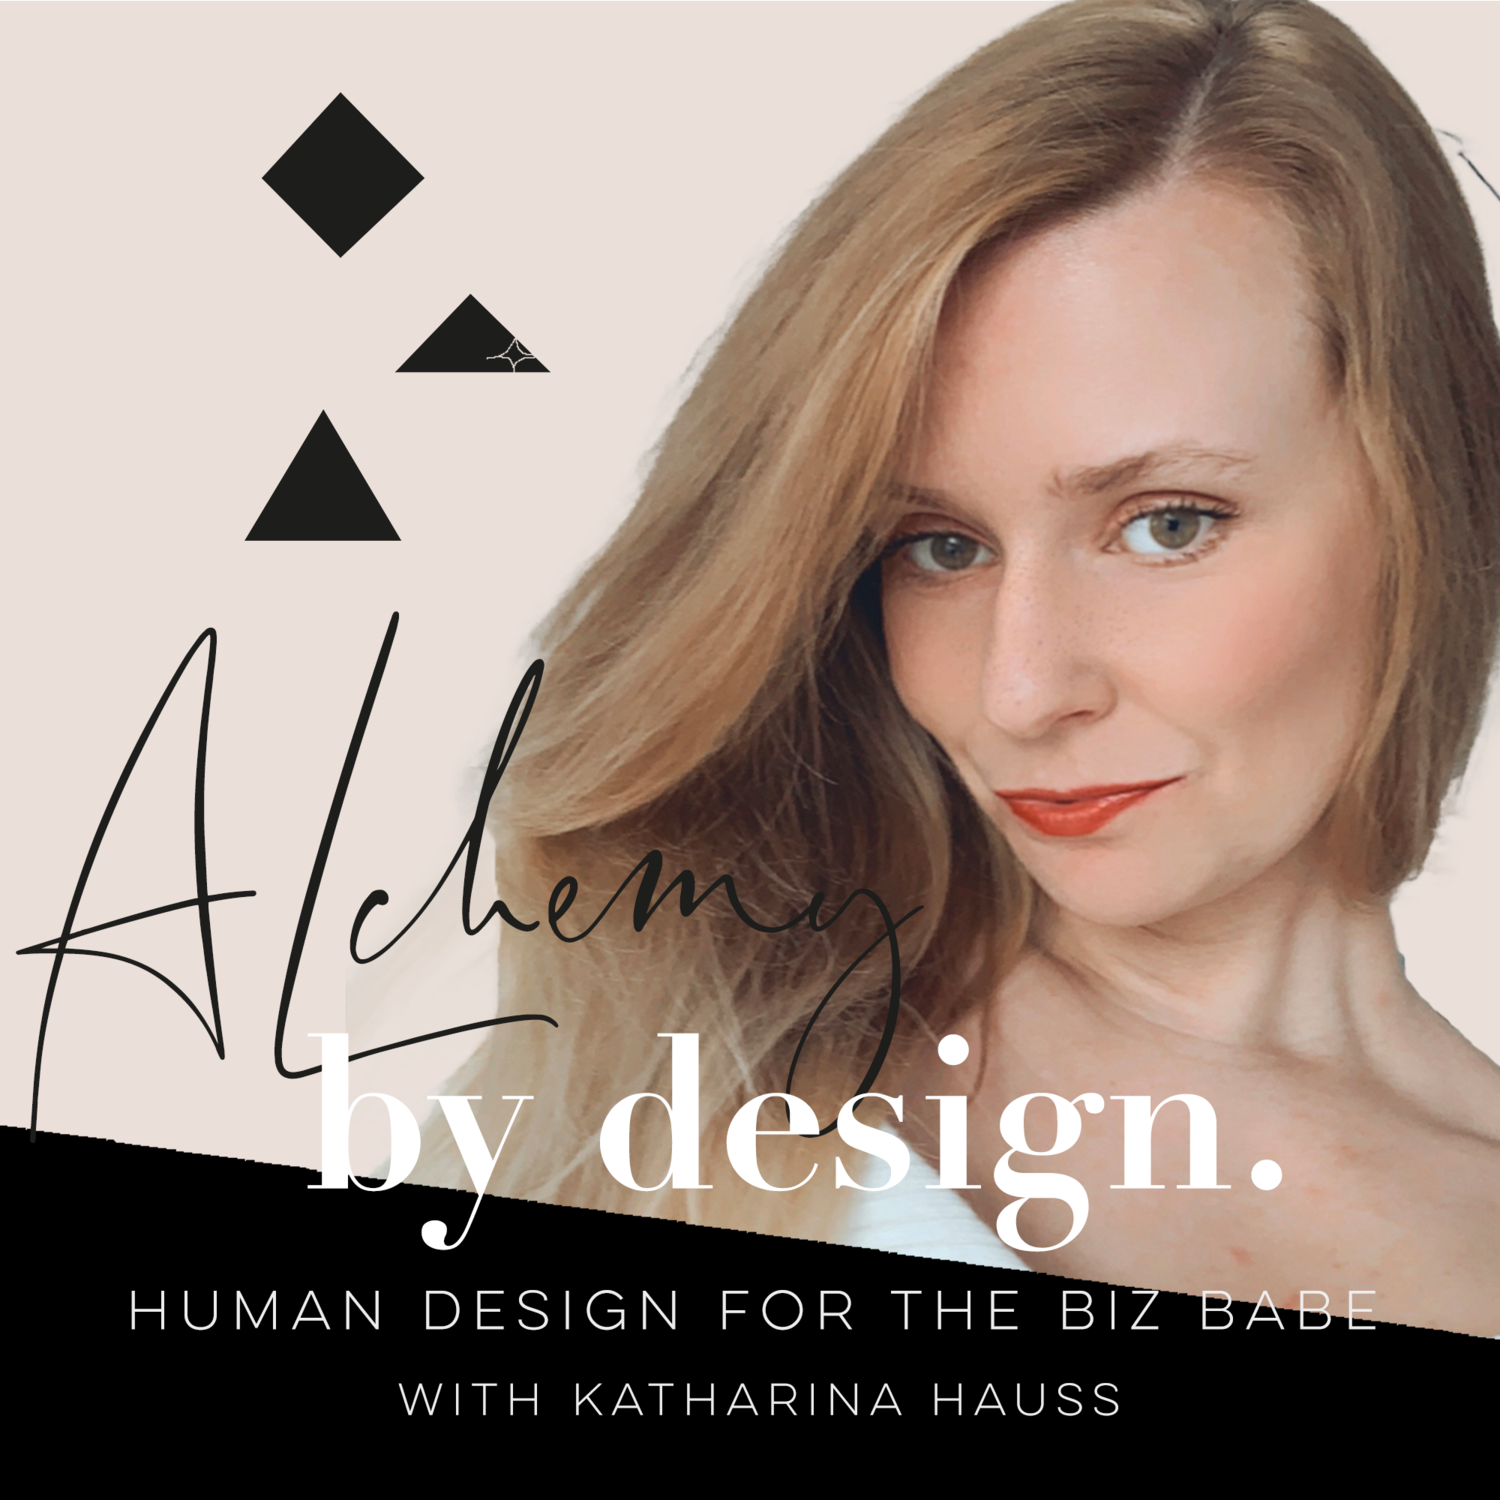 Alchemy by Design - Human Design for the Business Babe!